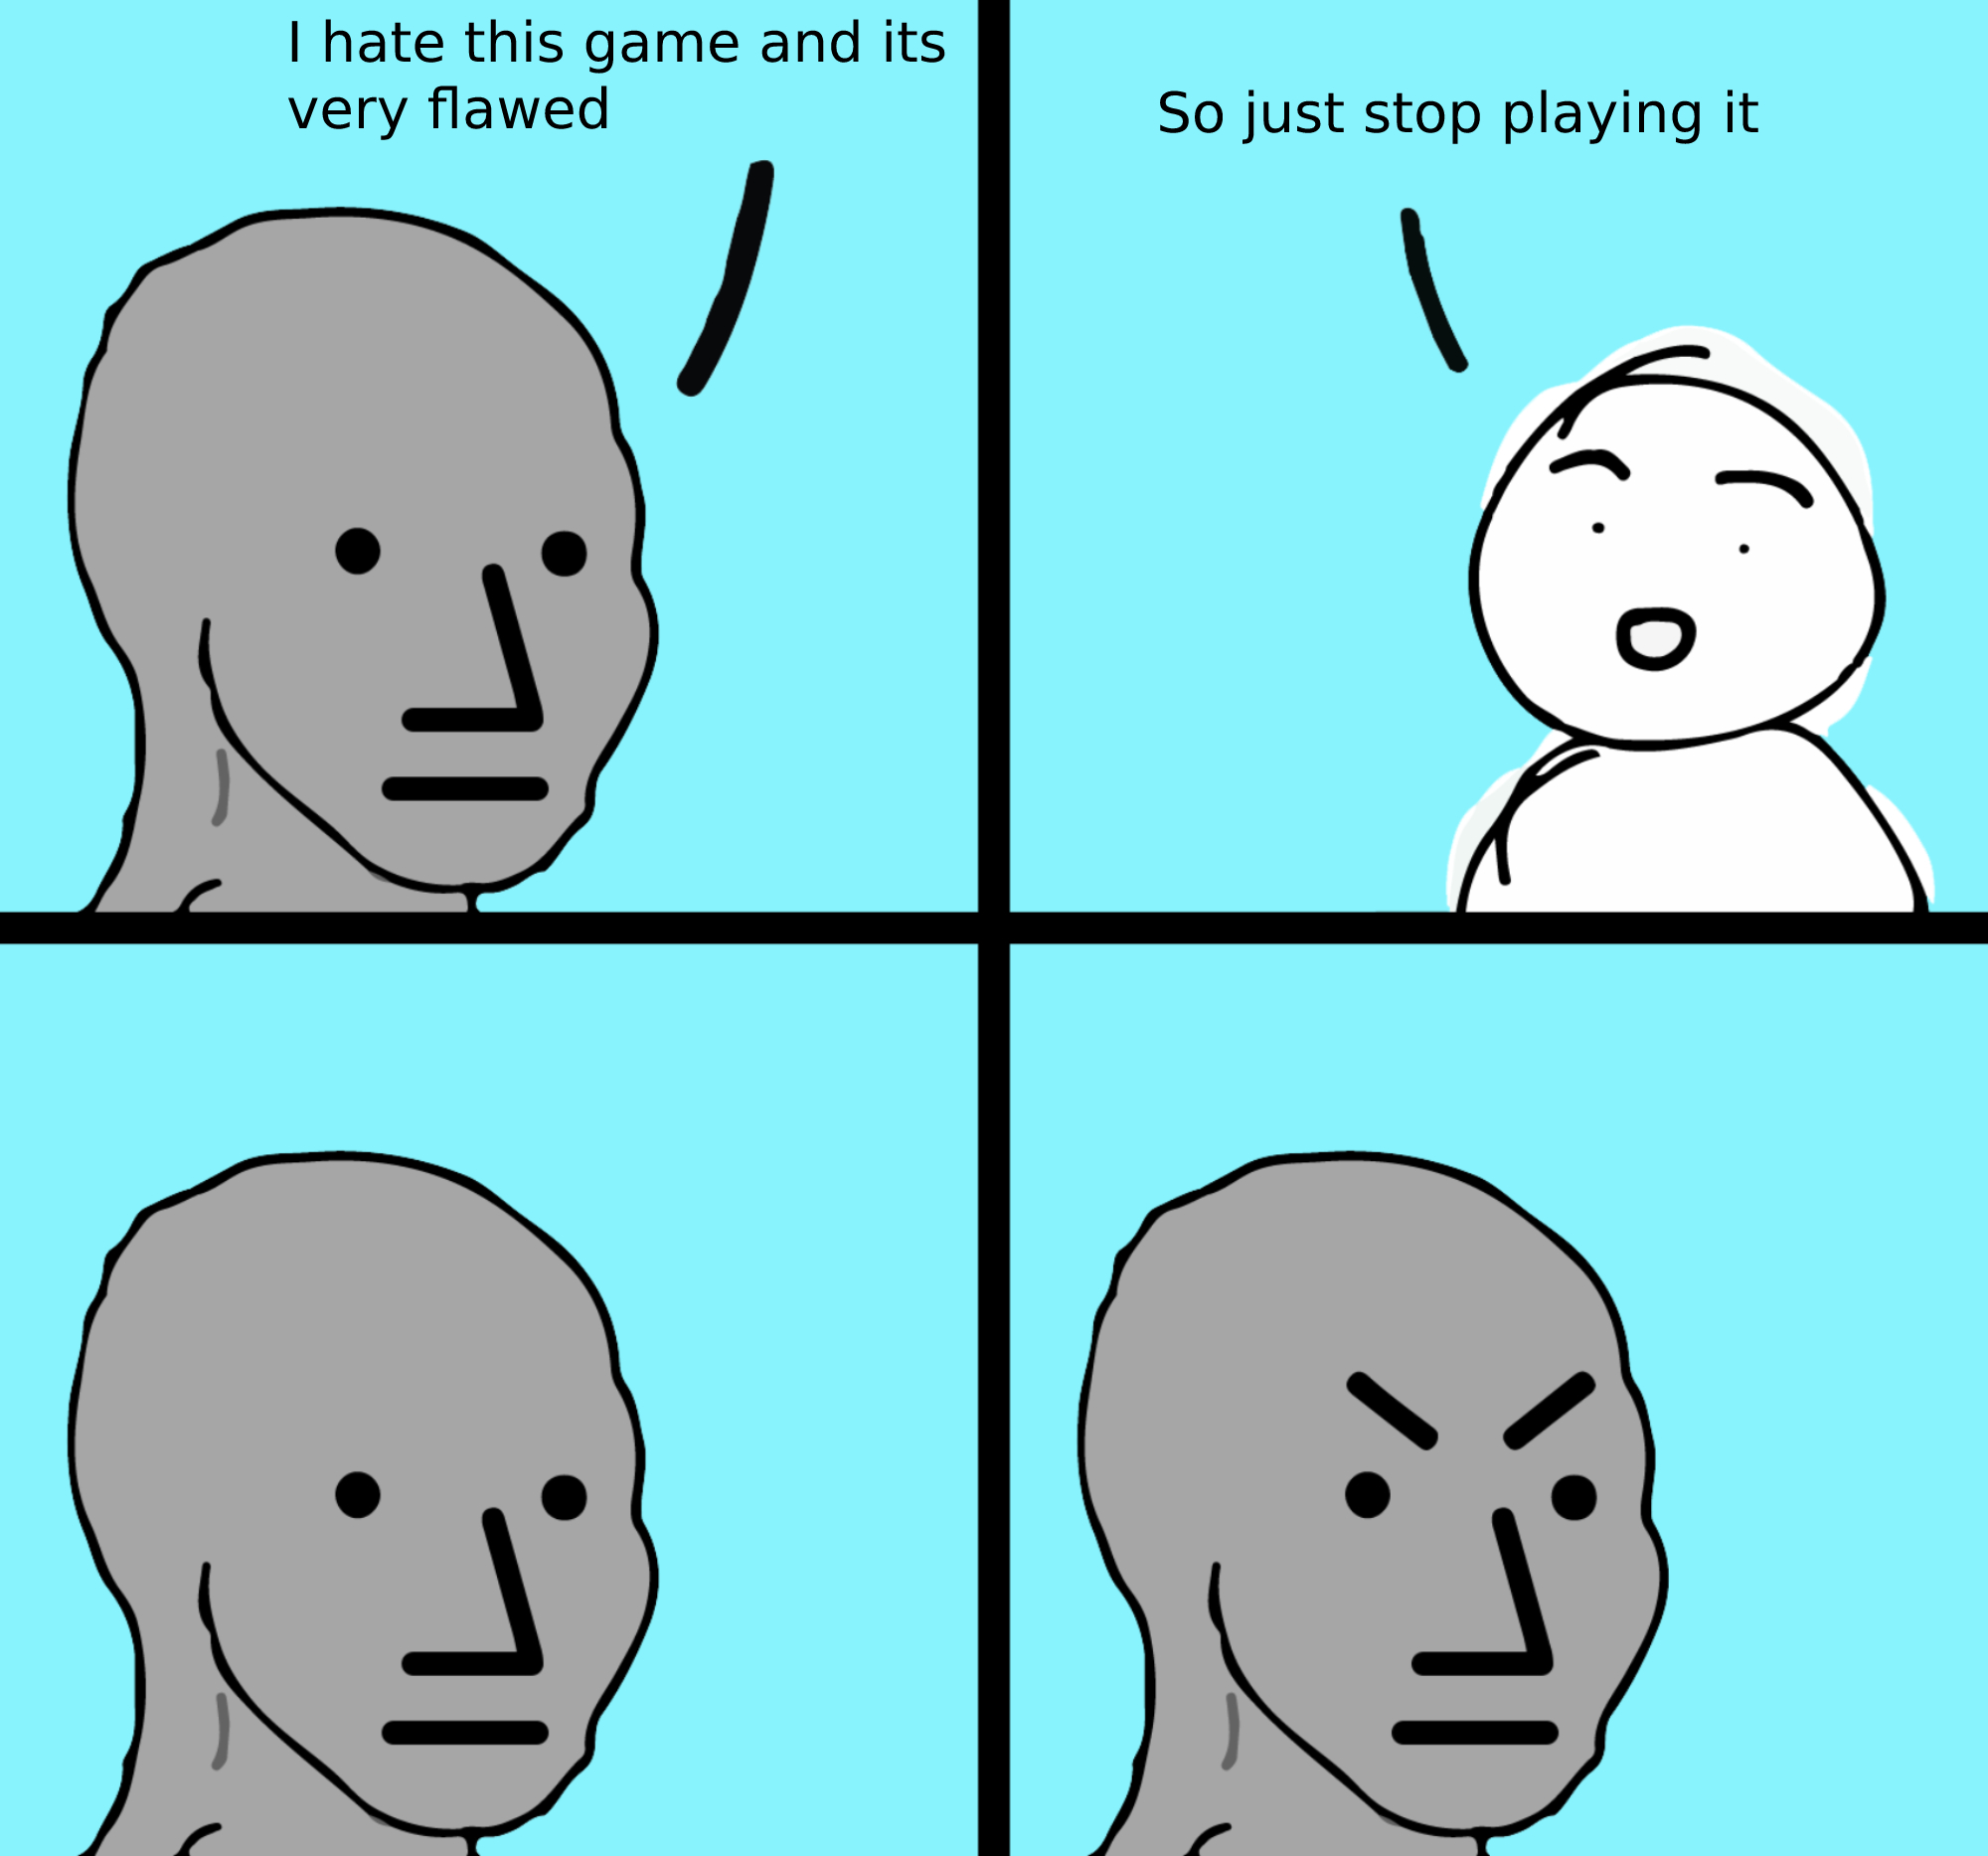 dank memes - angry comic meme - I hate this game and its very flawed So just stop playing it ,